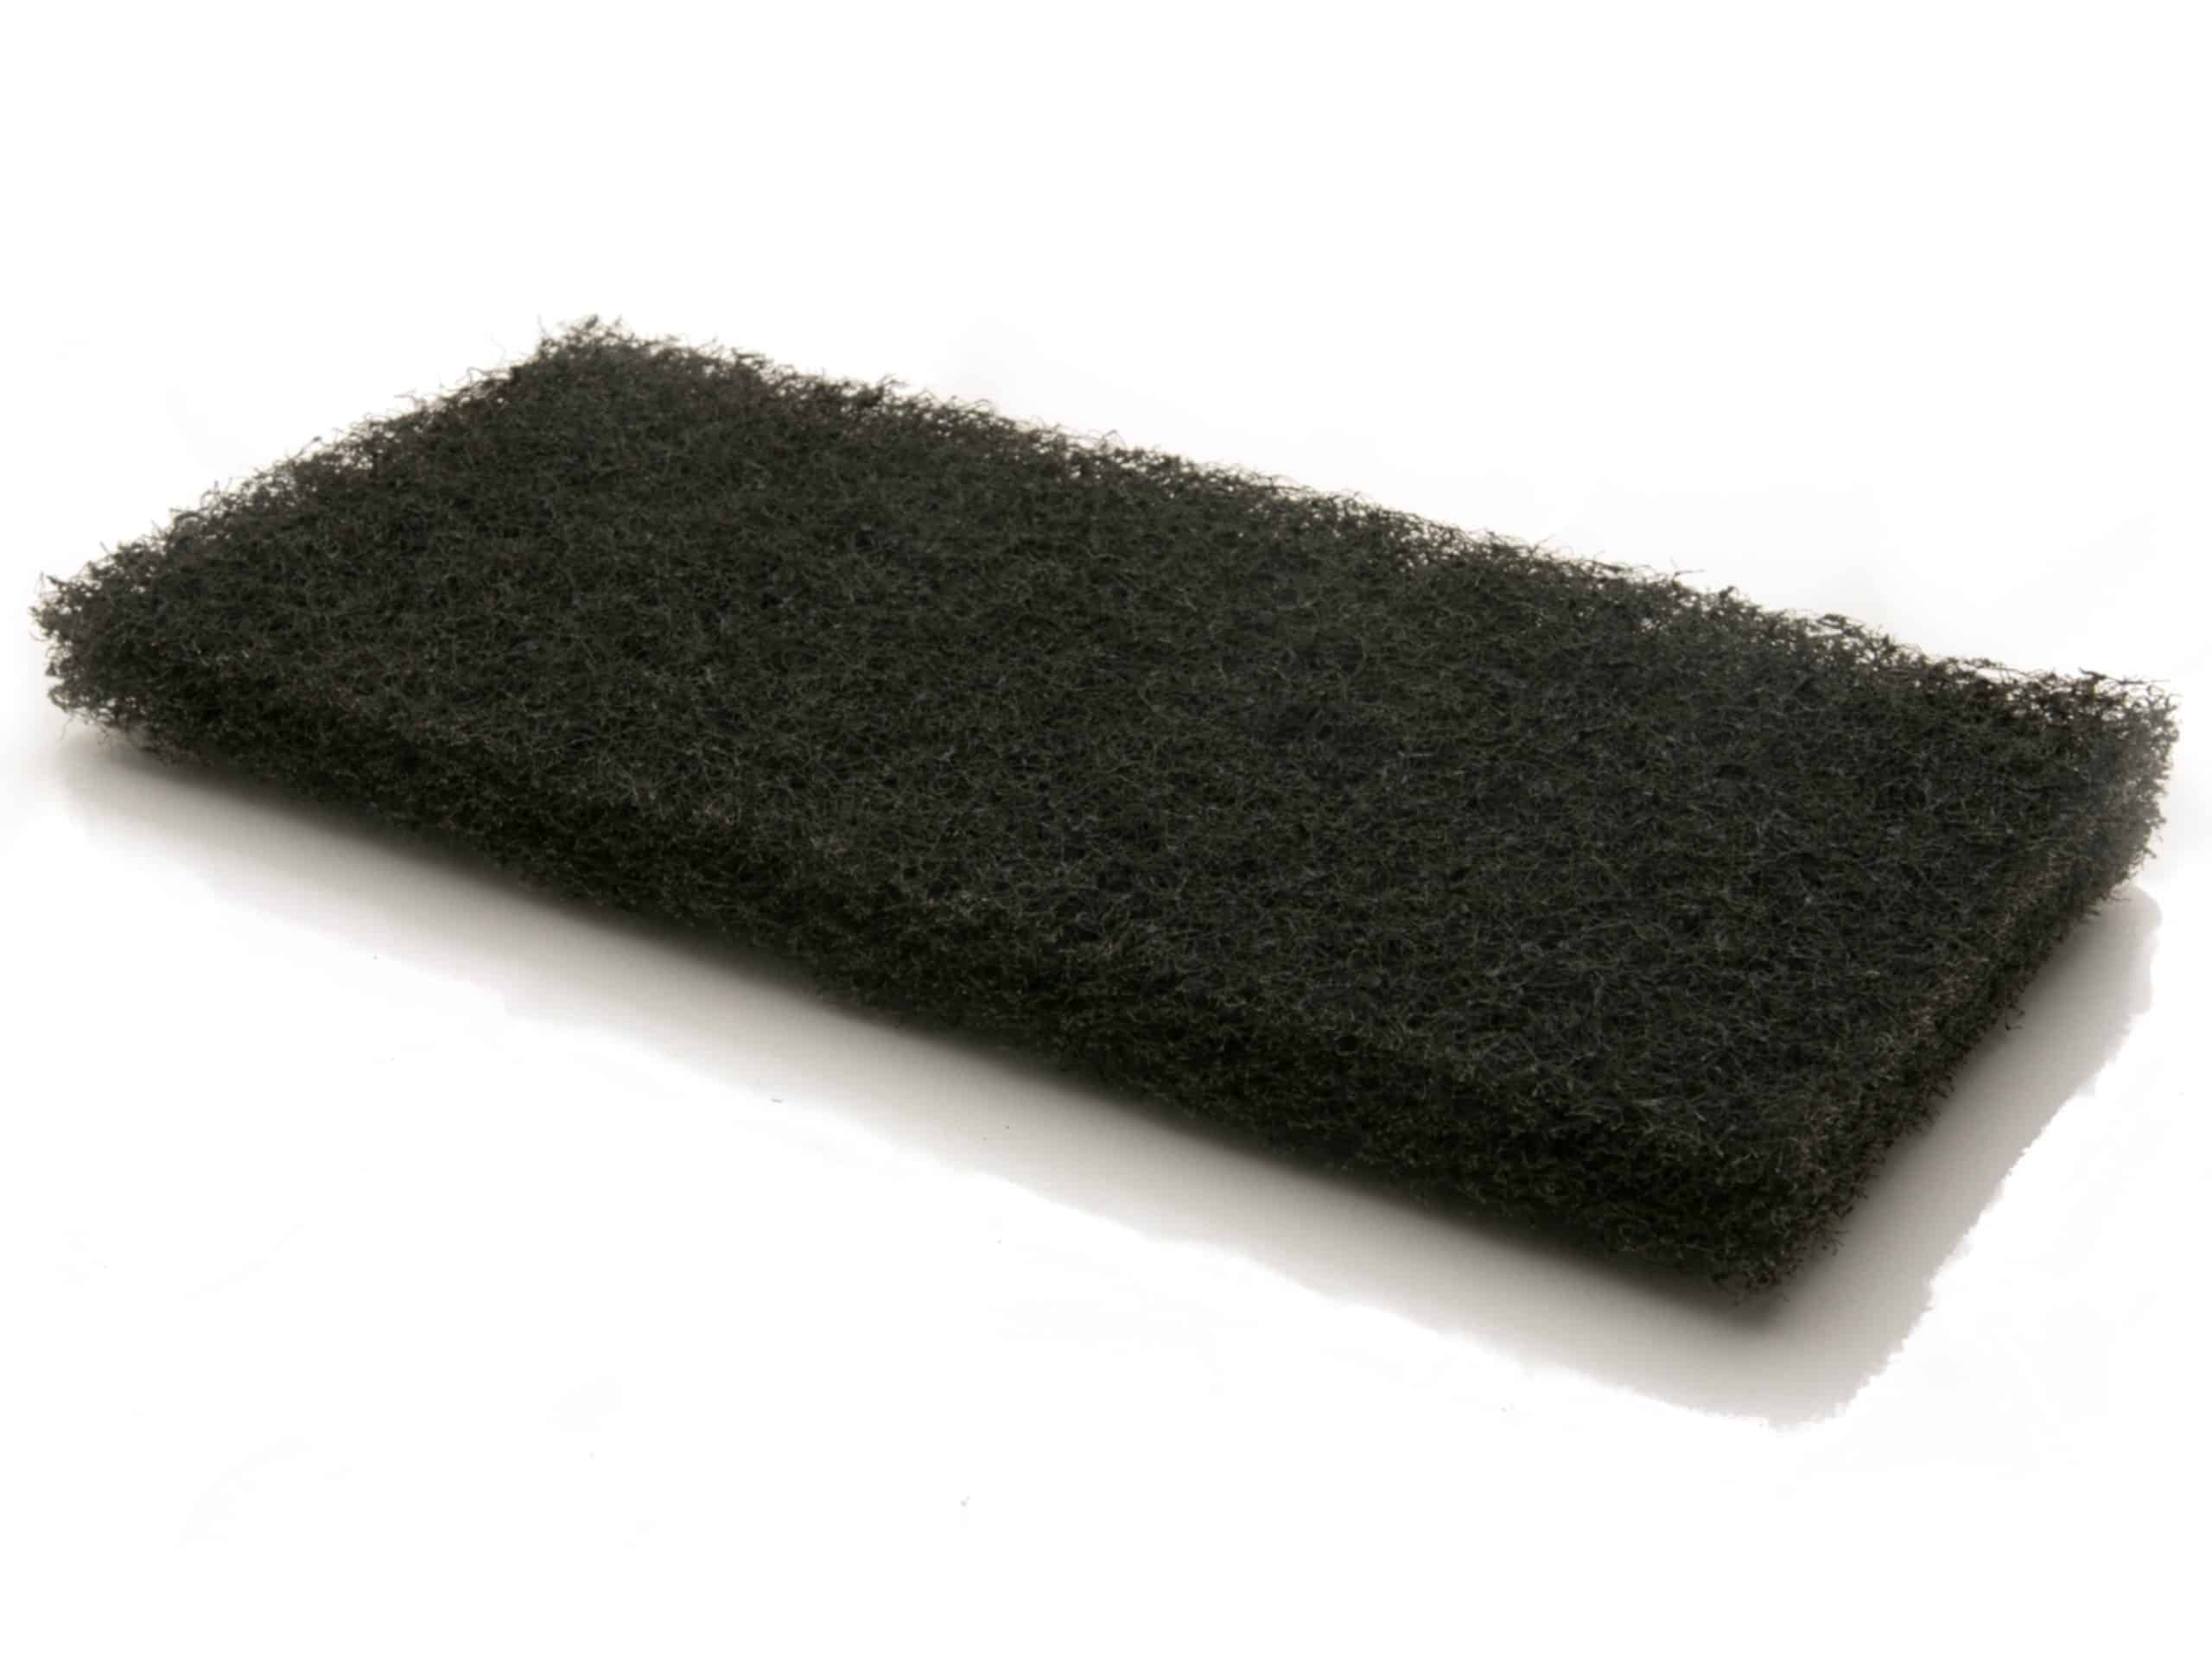 The Simple Scrub black pad is the most abrasive pad.